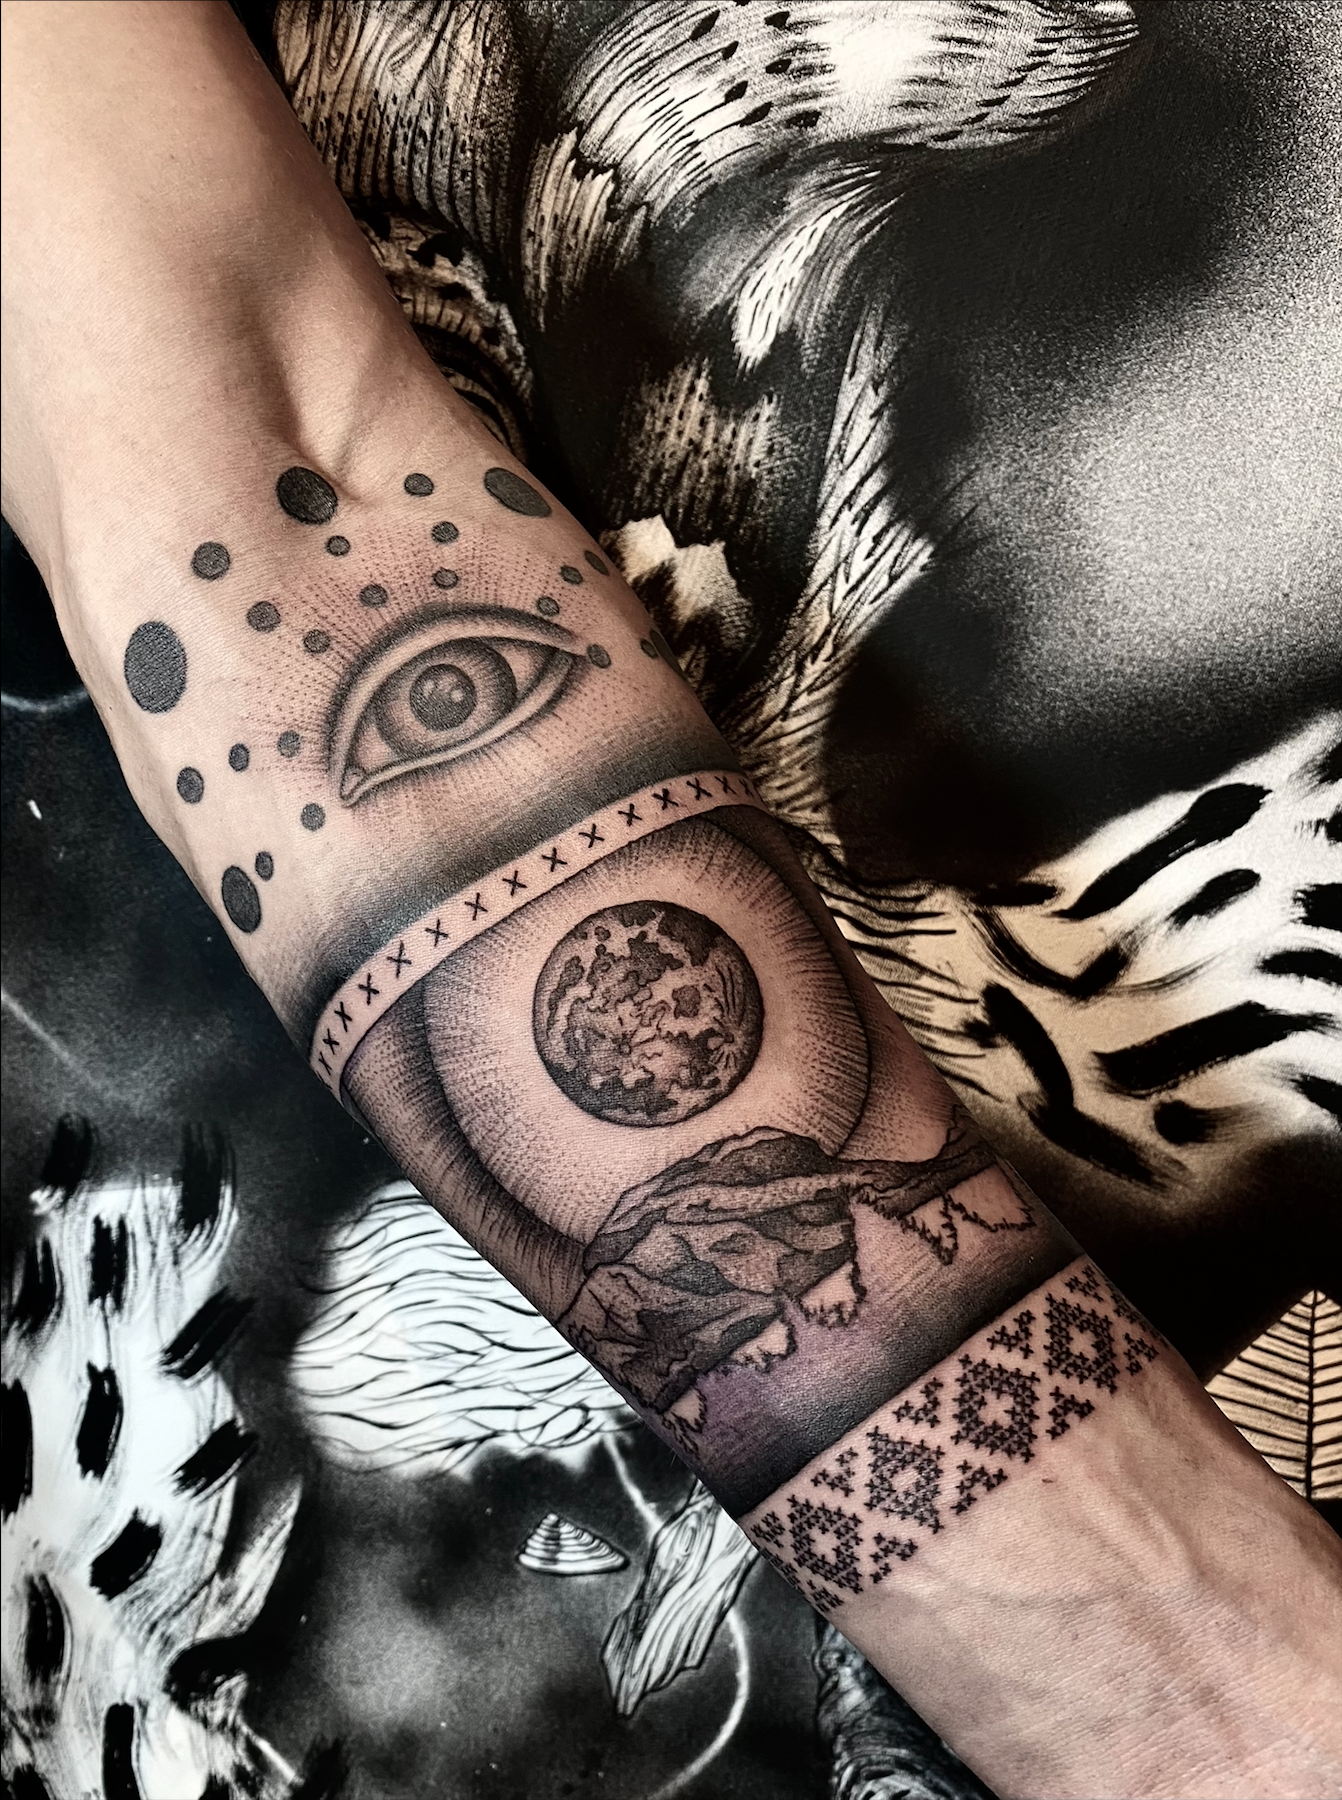 16 Beautiful Negative Space Tattoos to Inspire Your Next Ink